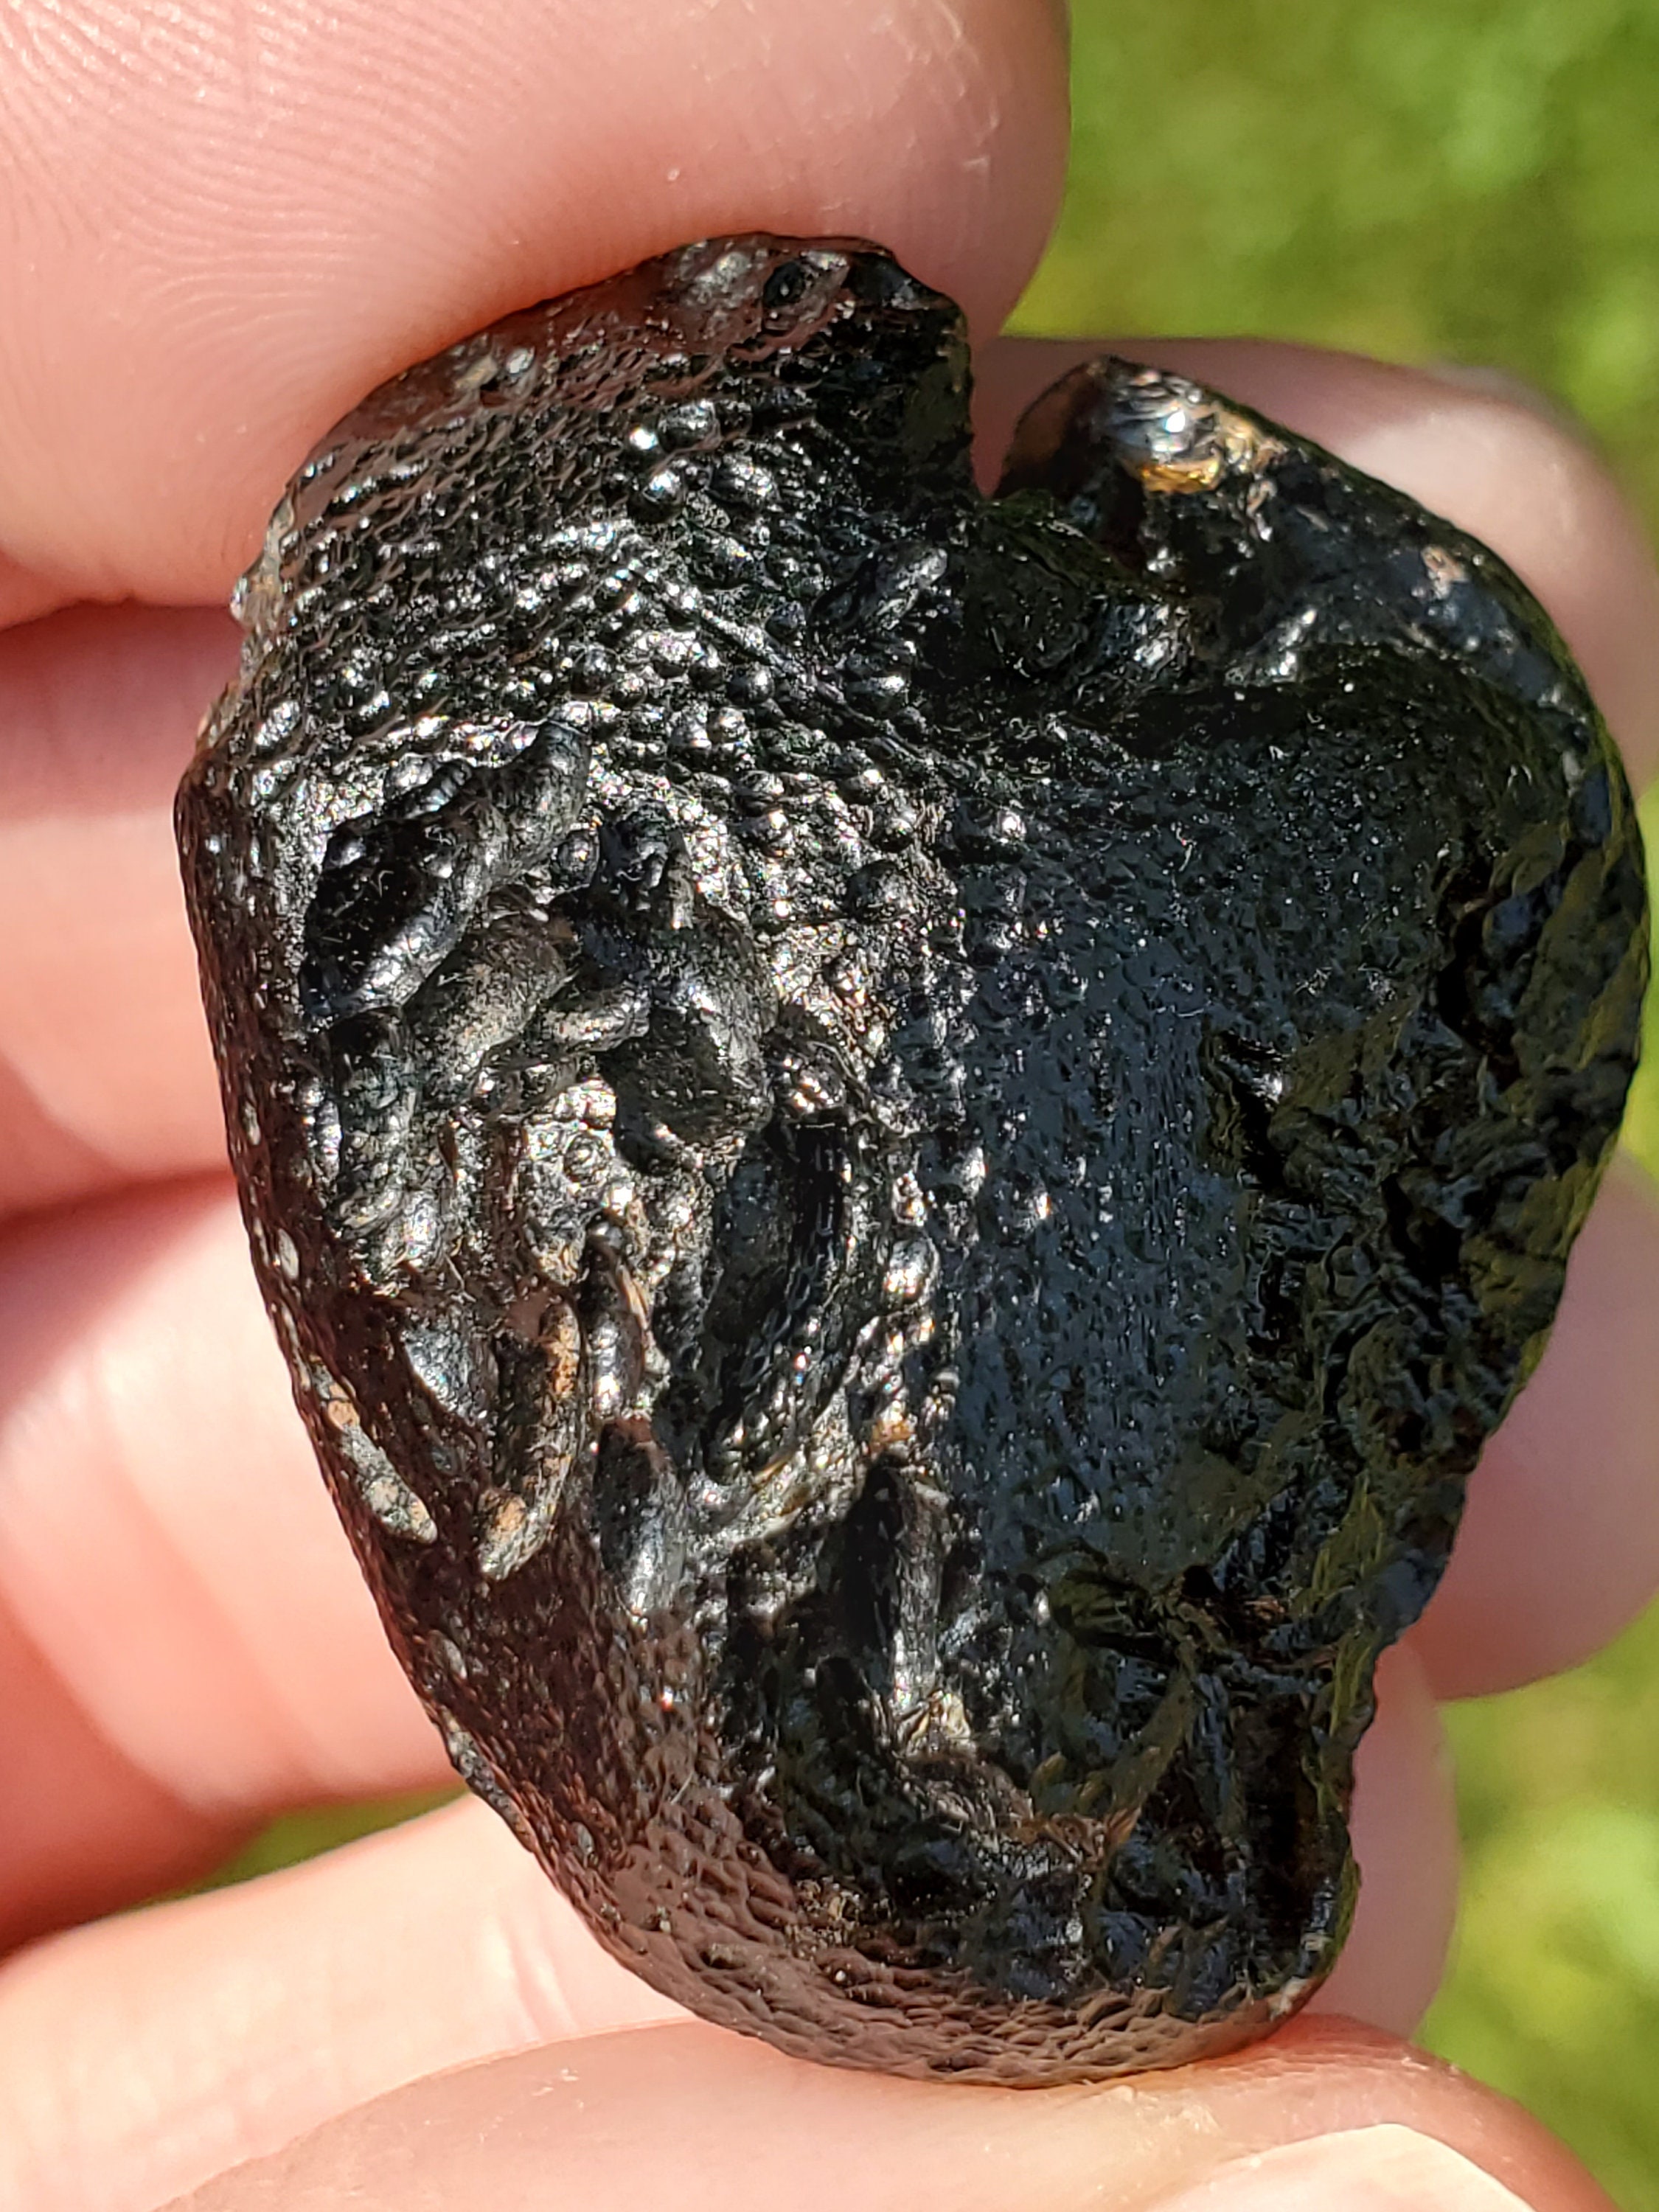 Tektite- Amazing 'Anda' Style Markings, Classic Y-Grooves, Rodent Chew ...